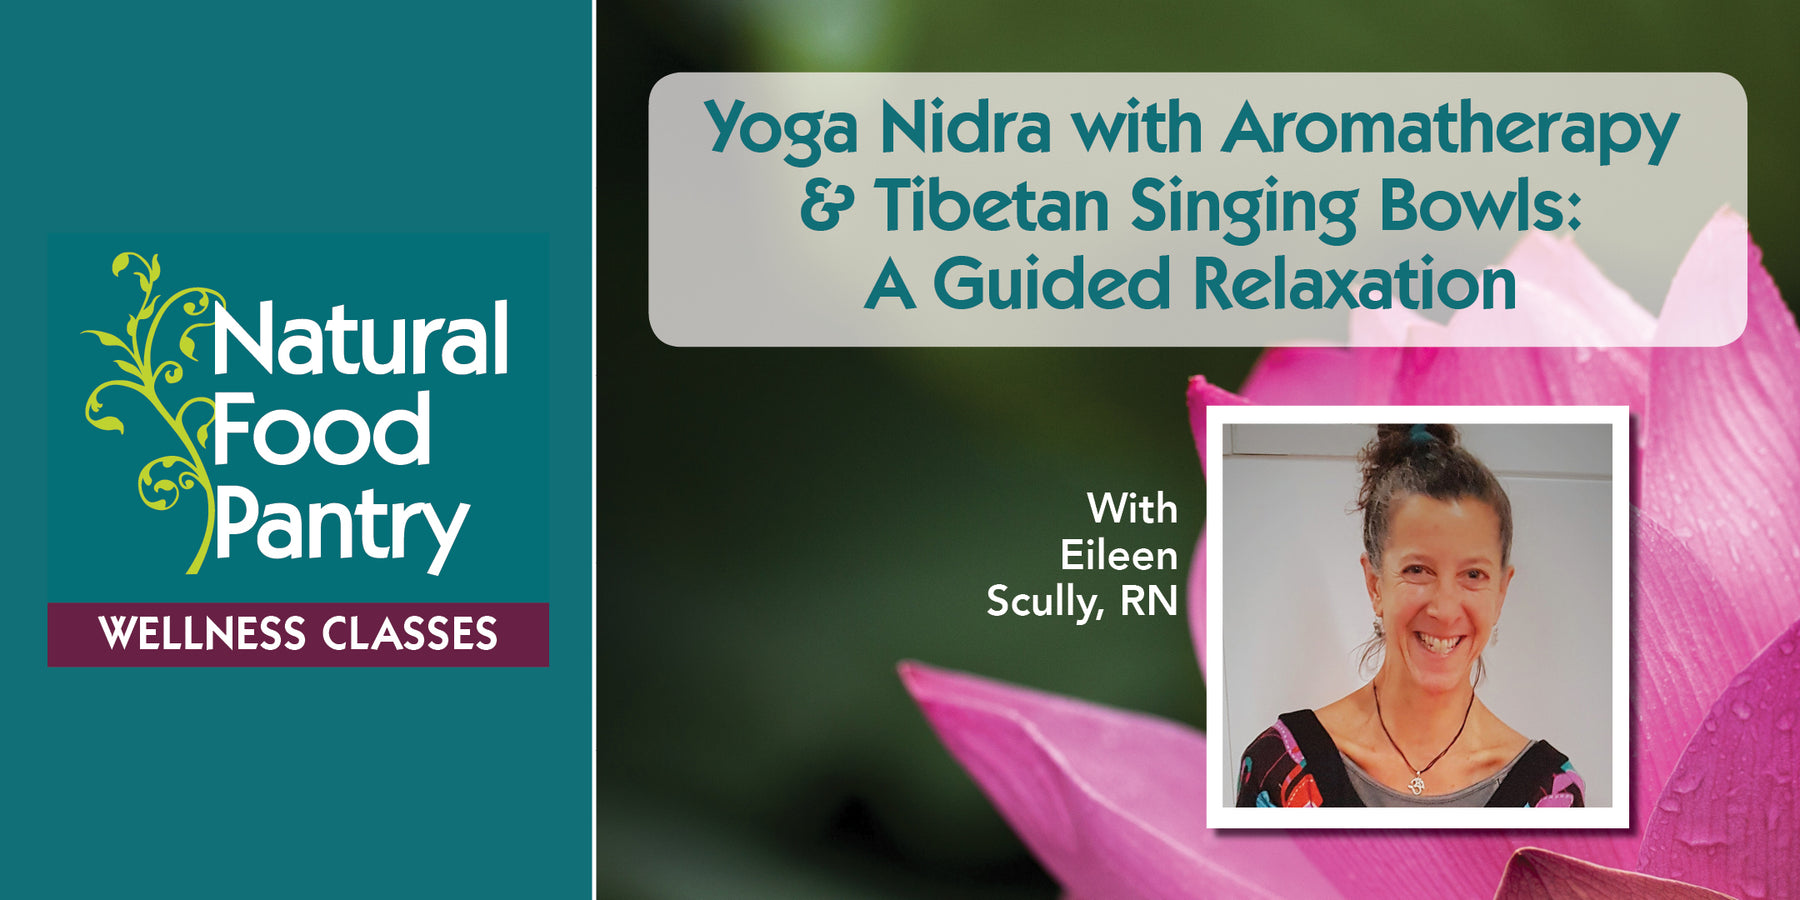 Oct 15: Yoga Nidra with Aromatherapy & Tibetan Singing Bowls: A Guided Relaxation